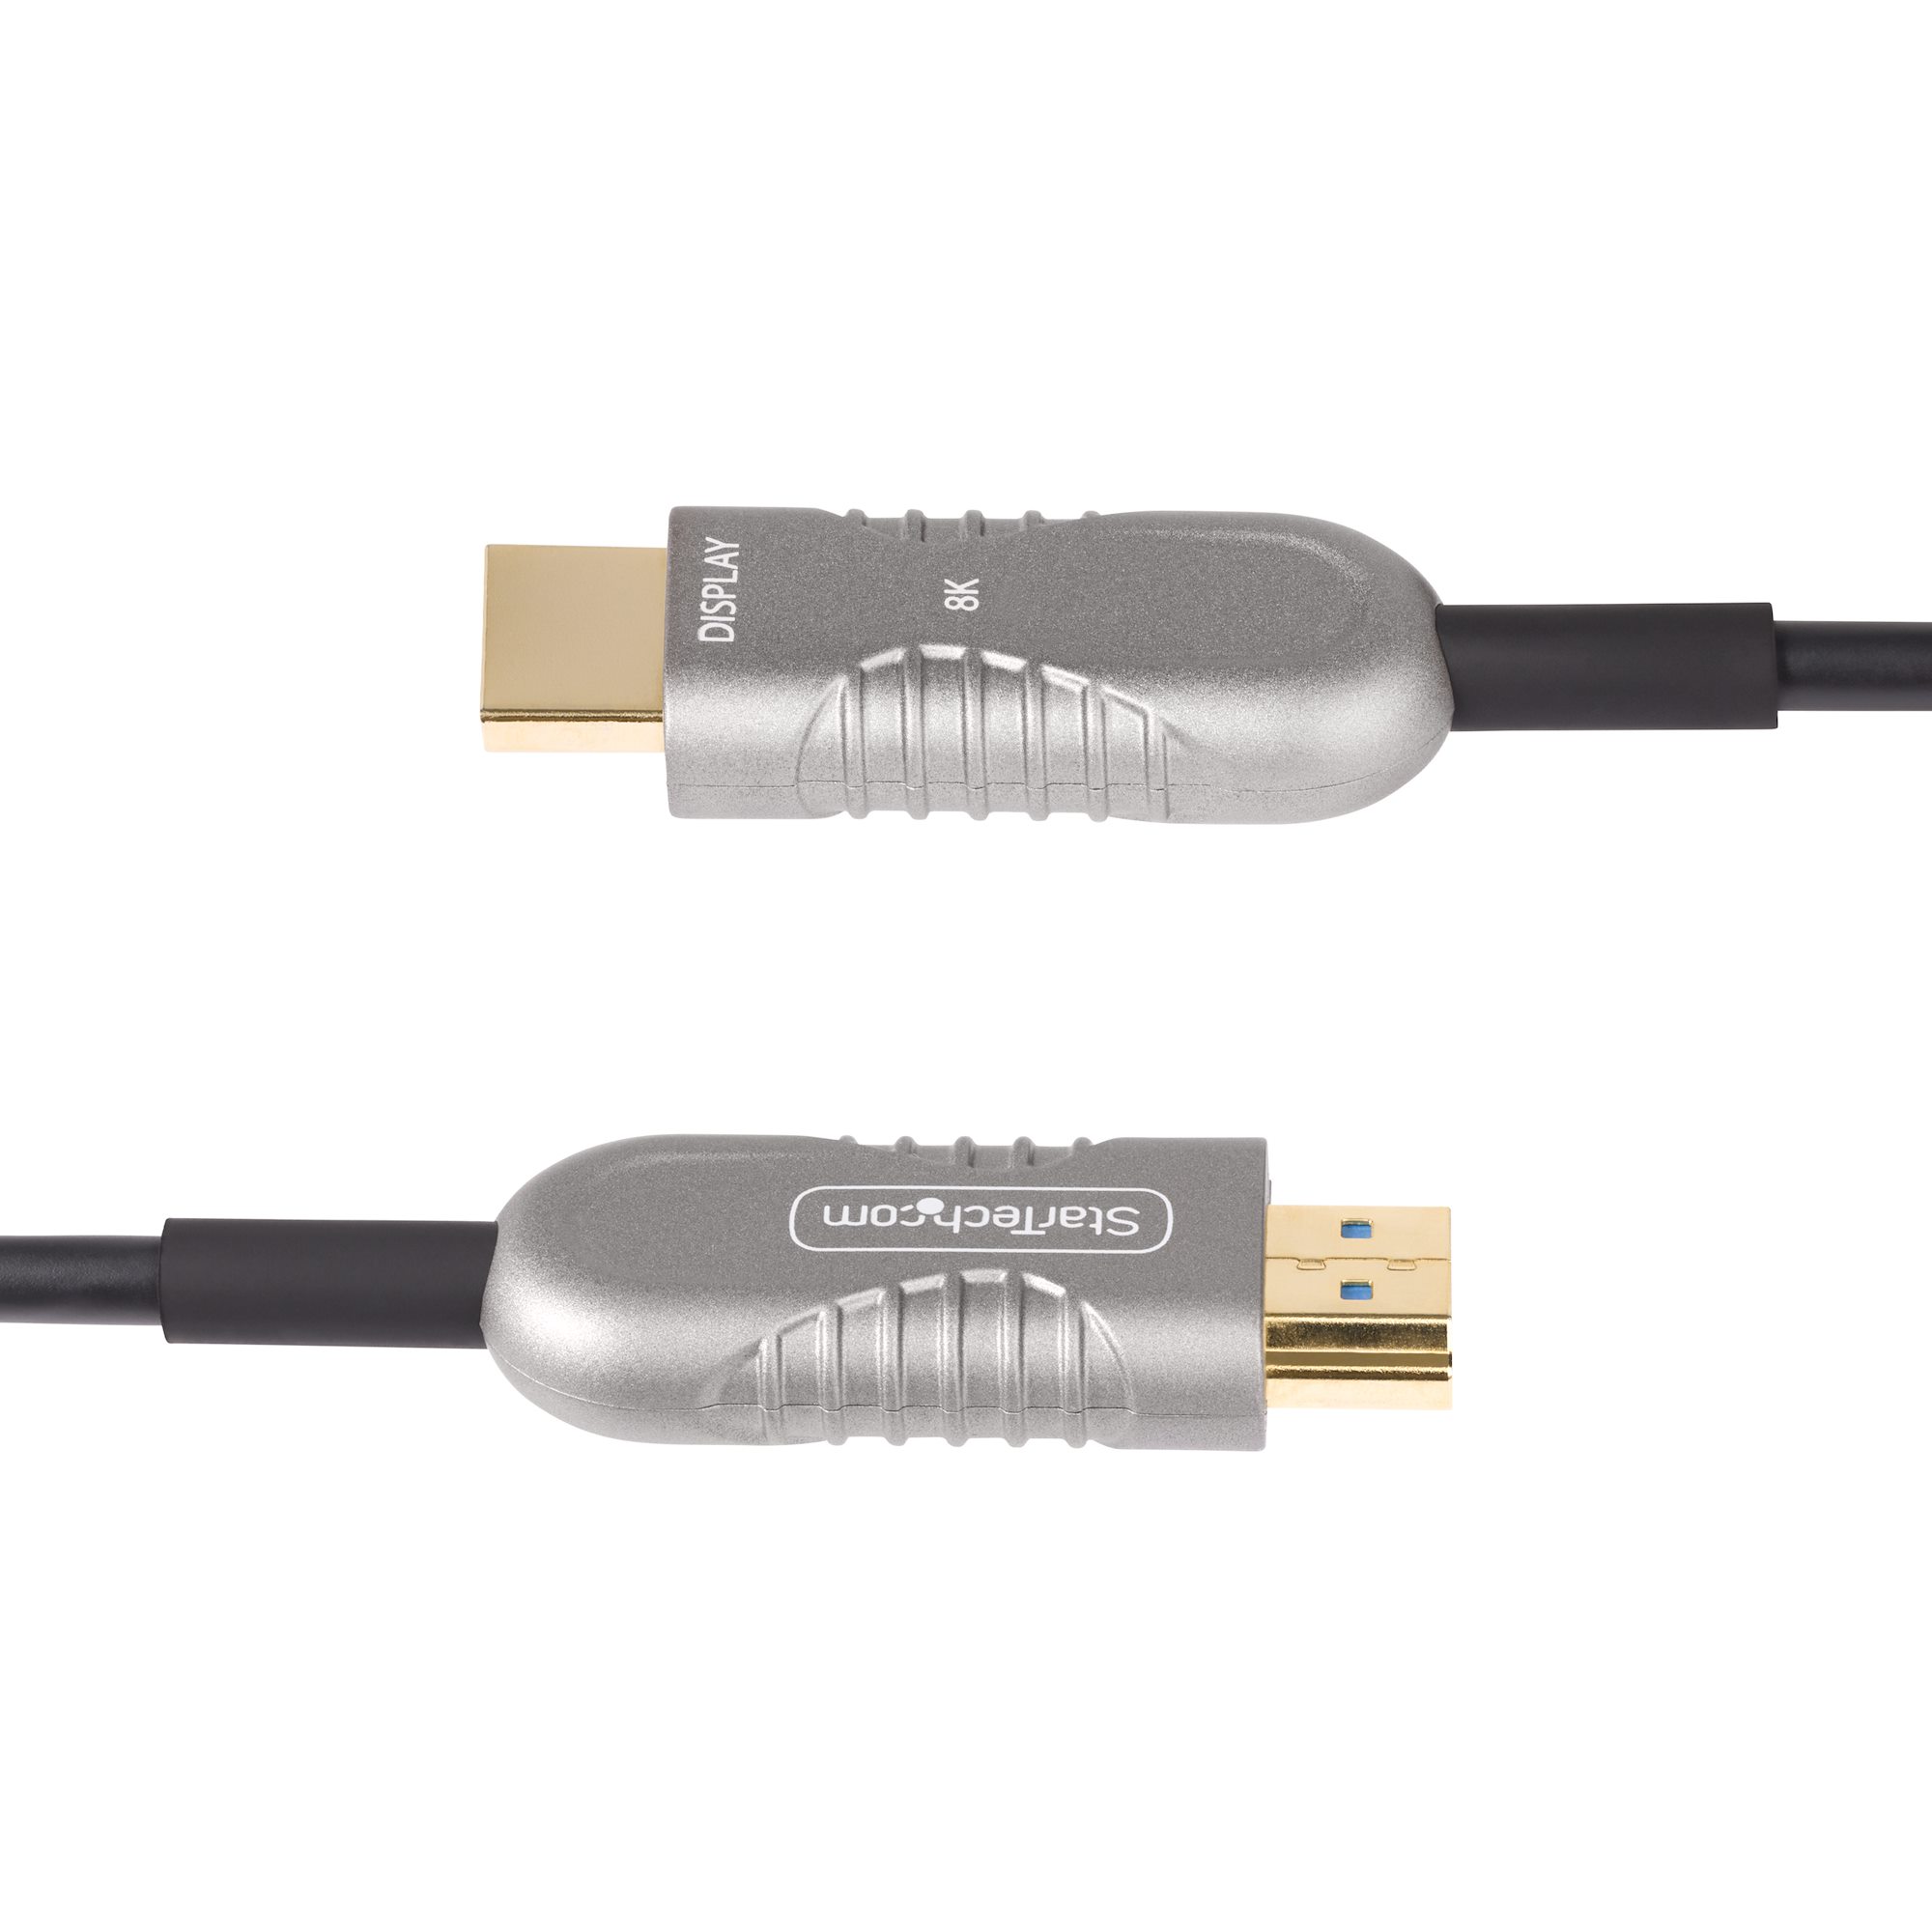 Armored 8K Fiber Optic HDMI 2.1 Active Optical Cable on drum